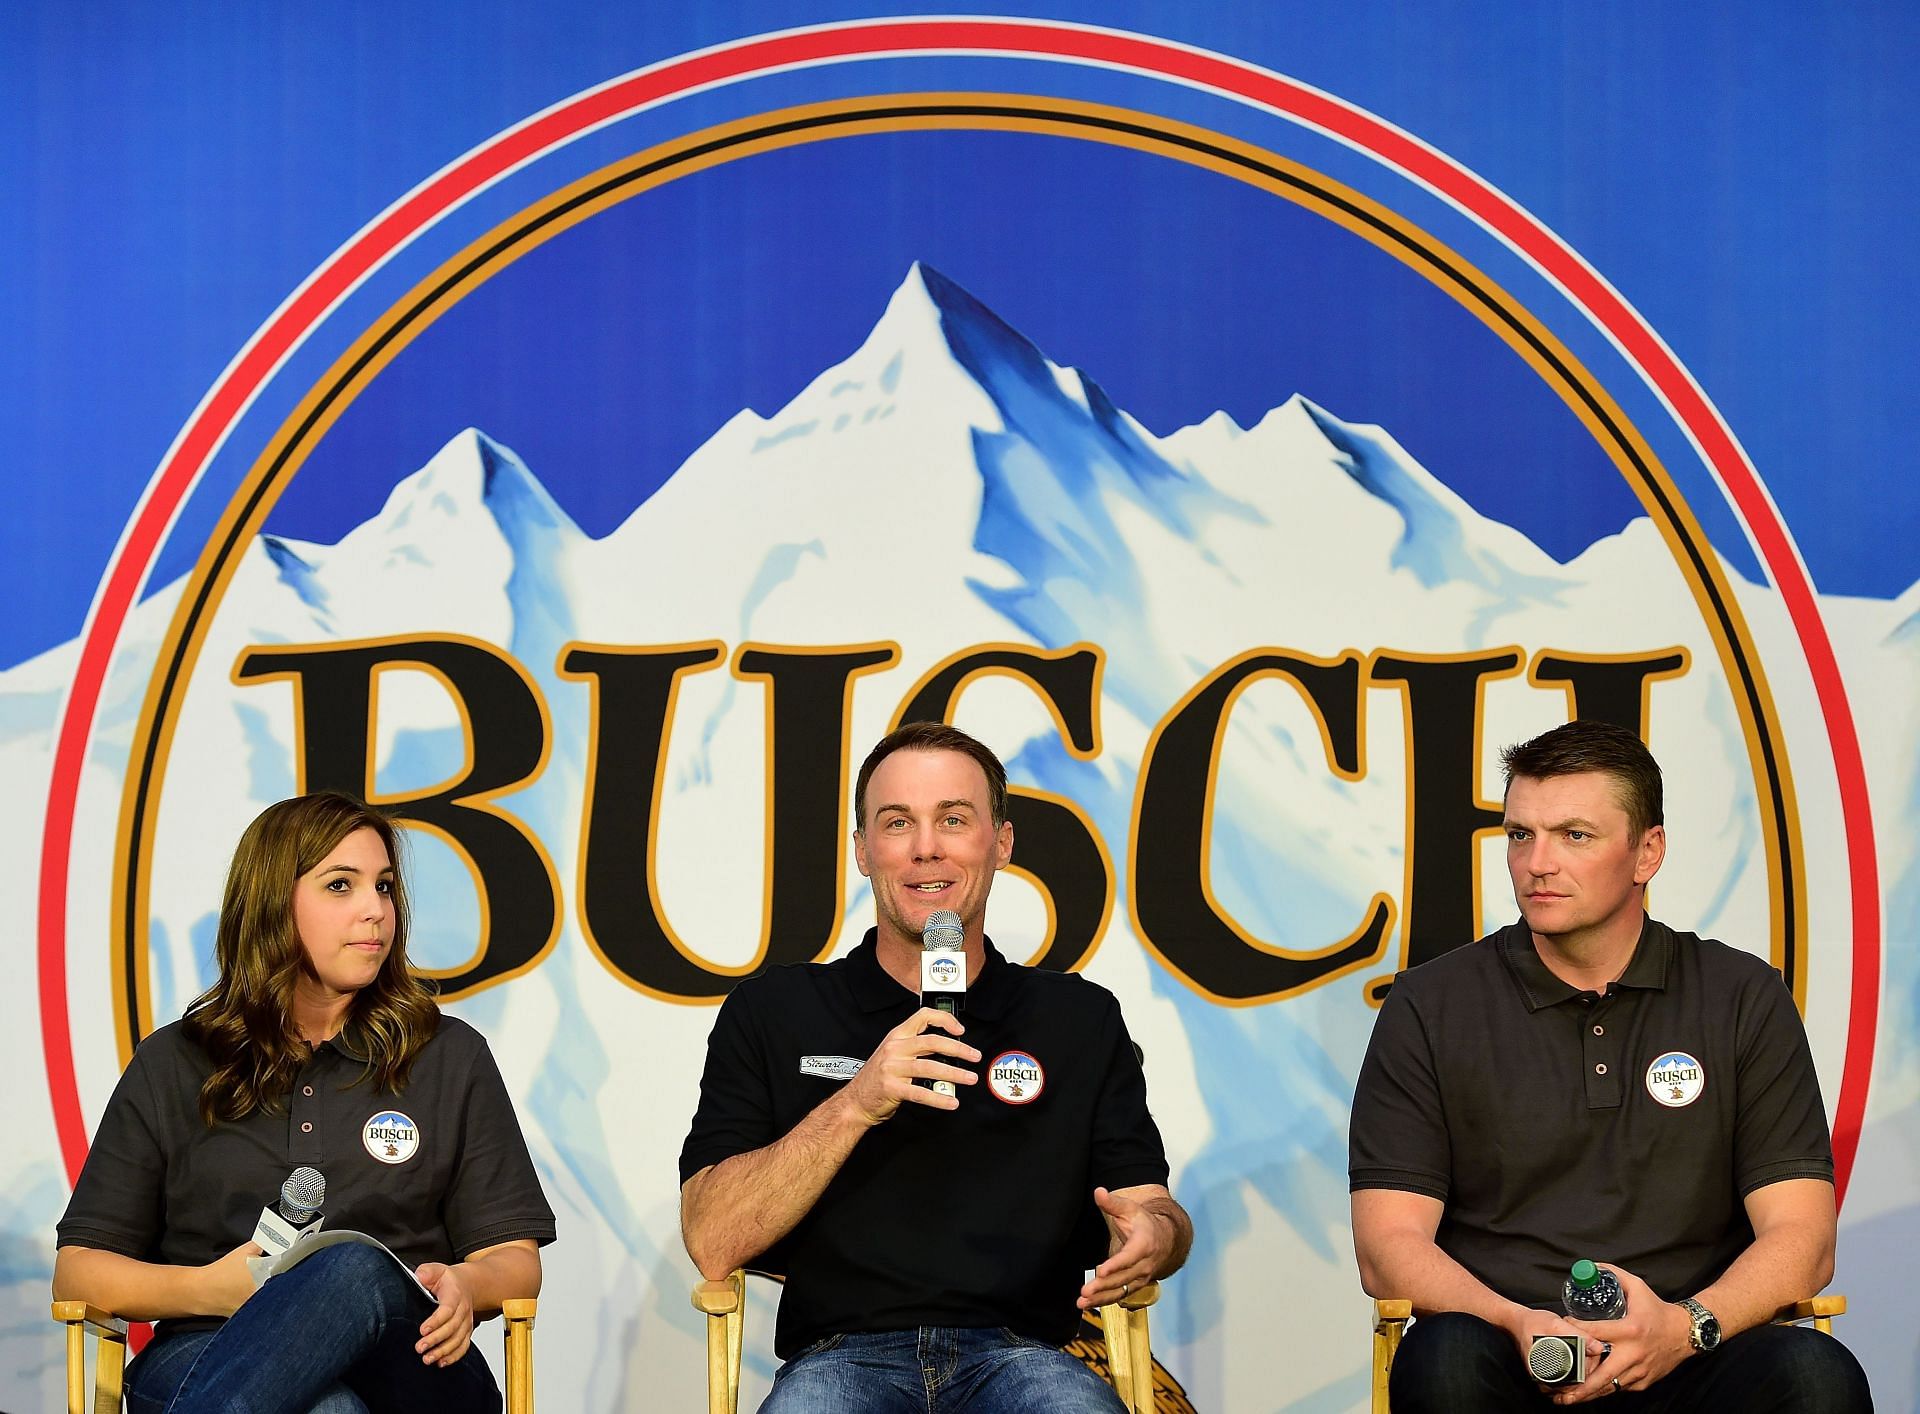 Busch Returns To Racing in 2016 As Sponsor of Driver Kevin Harvick &amp; No. 4 Team of Stewart-Haas Racing